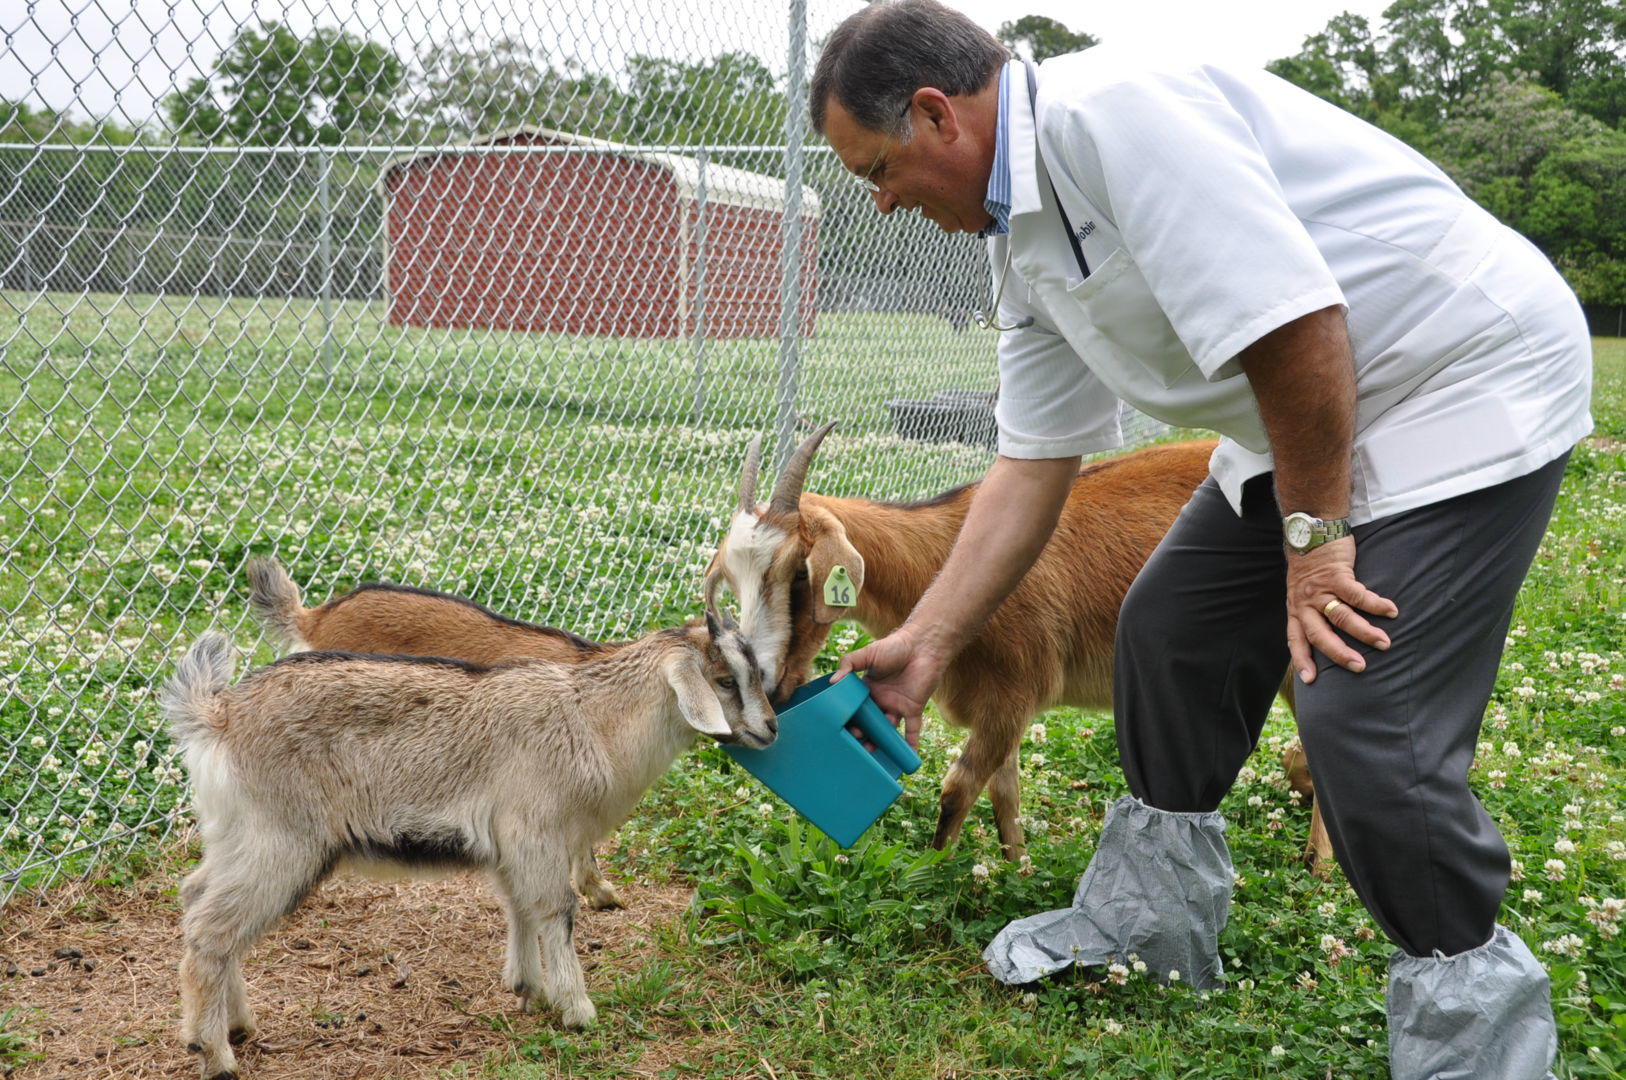 Dr. Seyedmehdi Mobini takes time to feed members of the goat herd on campus.